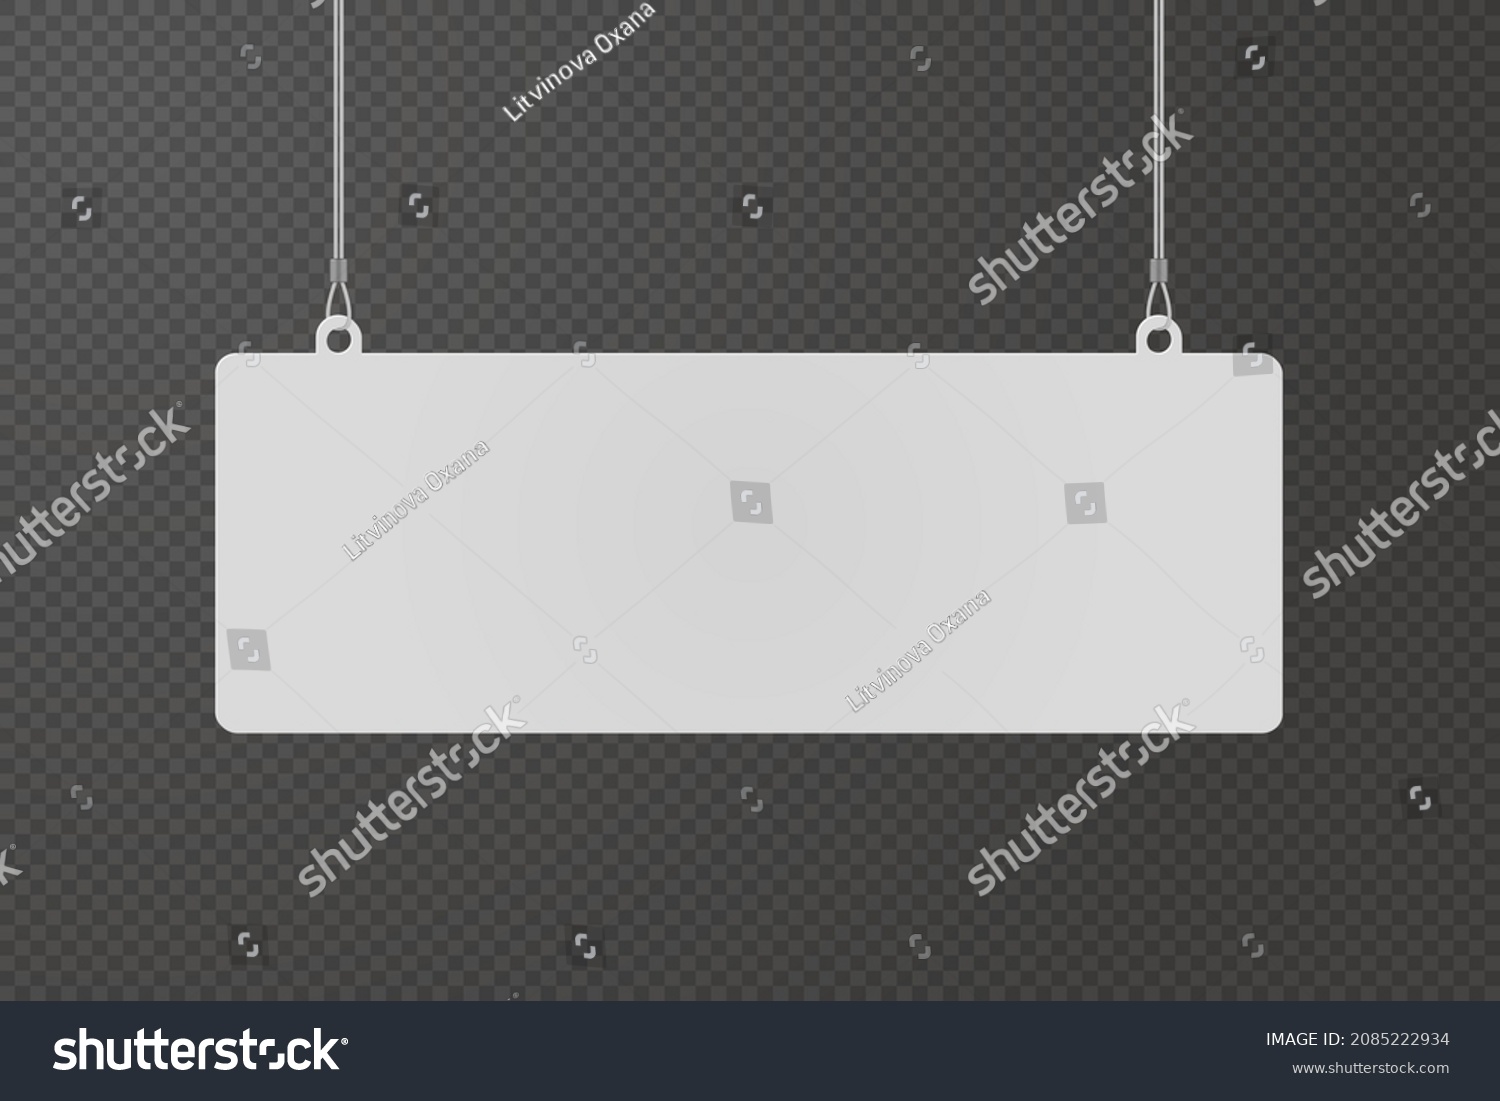 Rectangular dangler hanging from ceiling realistic mockup on transparent background. Mock up of advertising promotion pointer for supermarket sale announcement. Mall store label vector illustration #2085222934